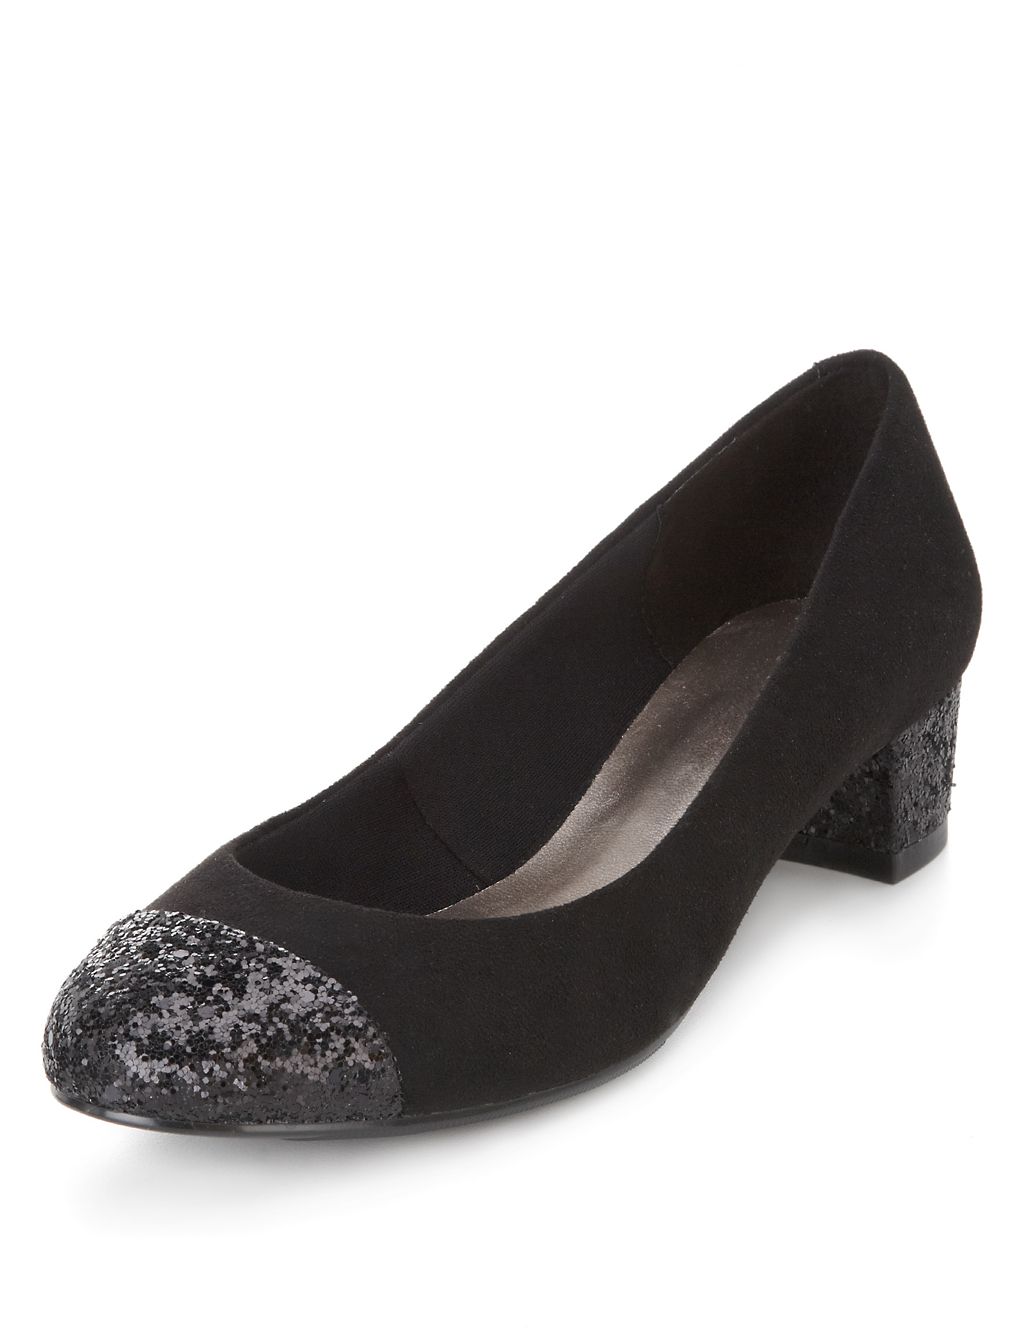 Glitter Toe Cap Court Shoes with Insolia Flex® 3 of 3